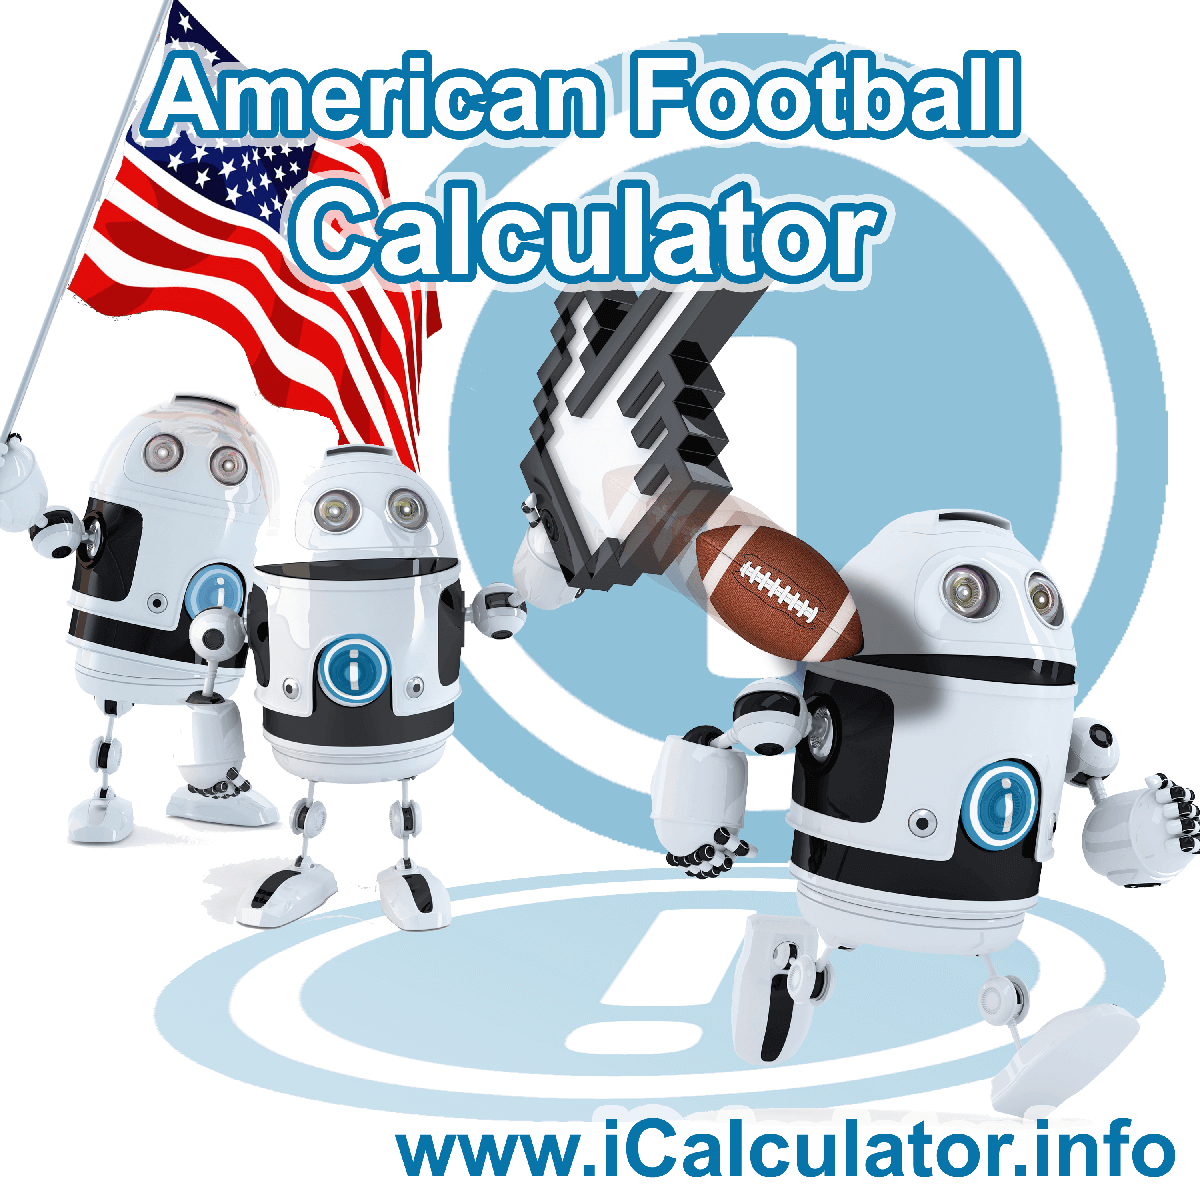 American Football Calculator. This image shows Robot American Football Players and Football fans watching an American football math with robots on iCalculator